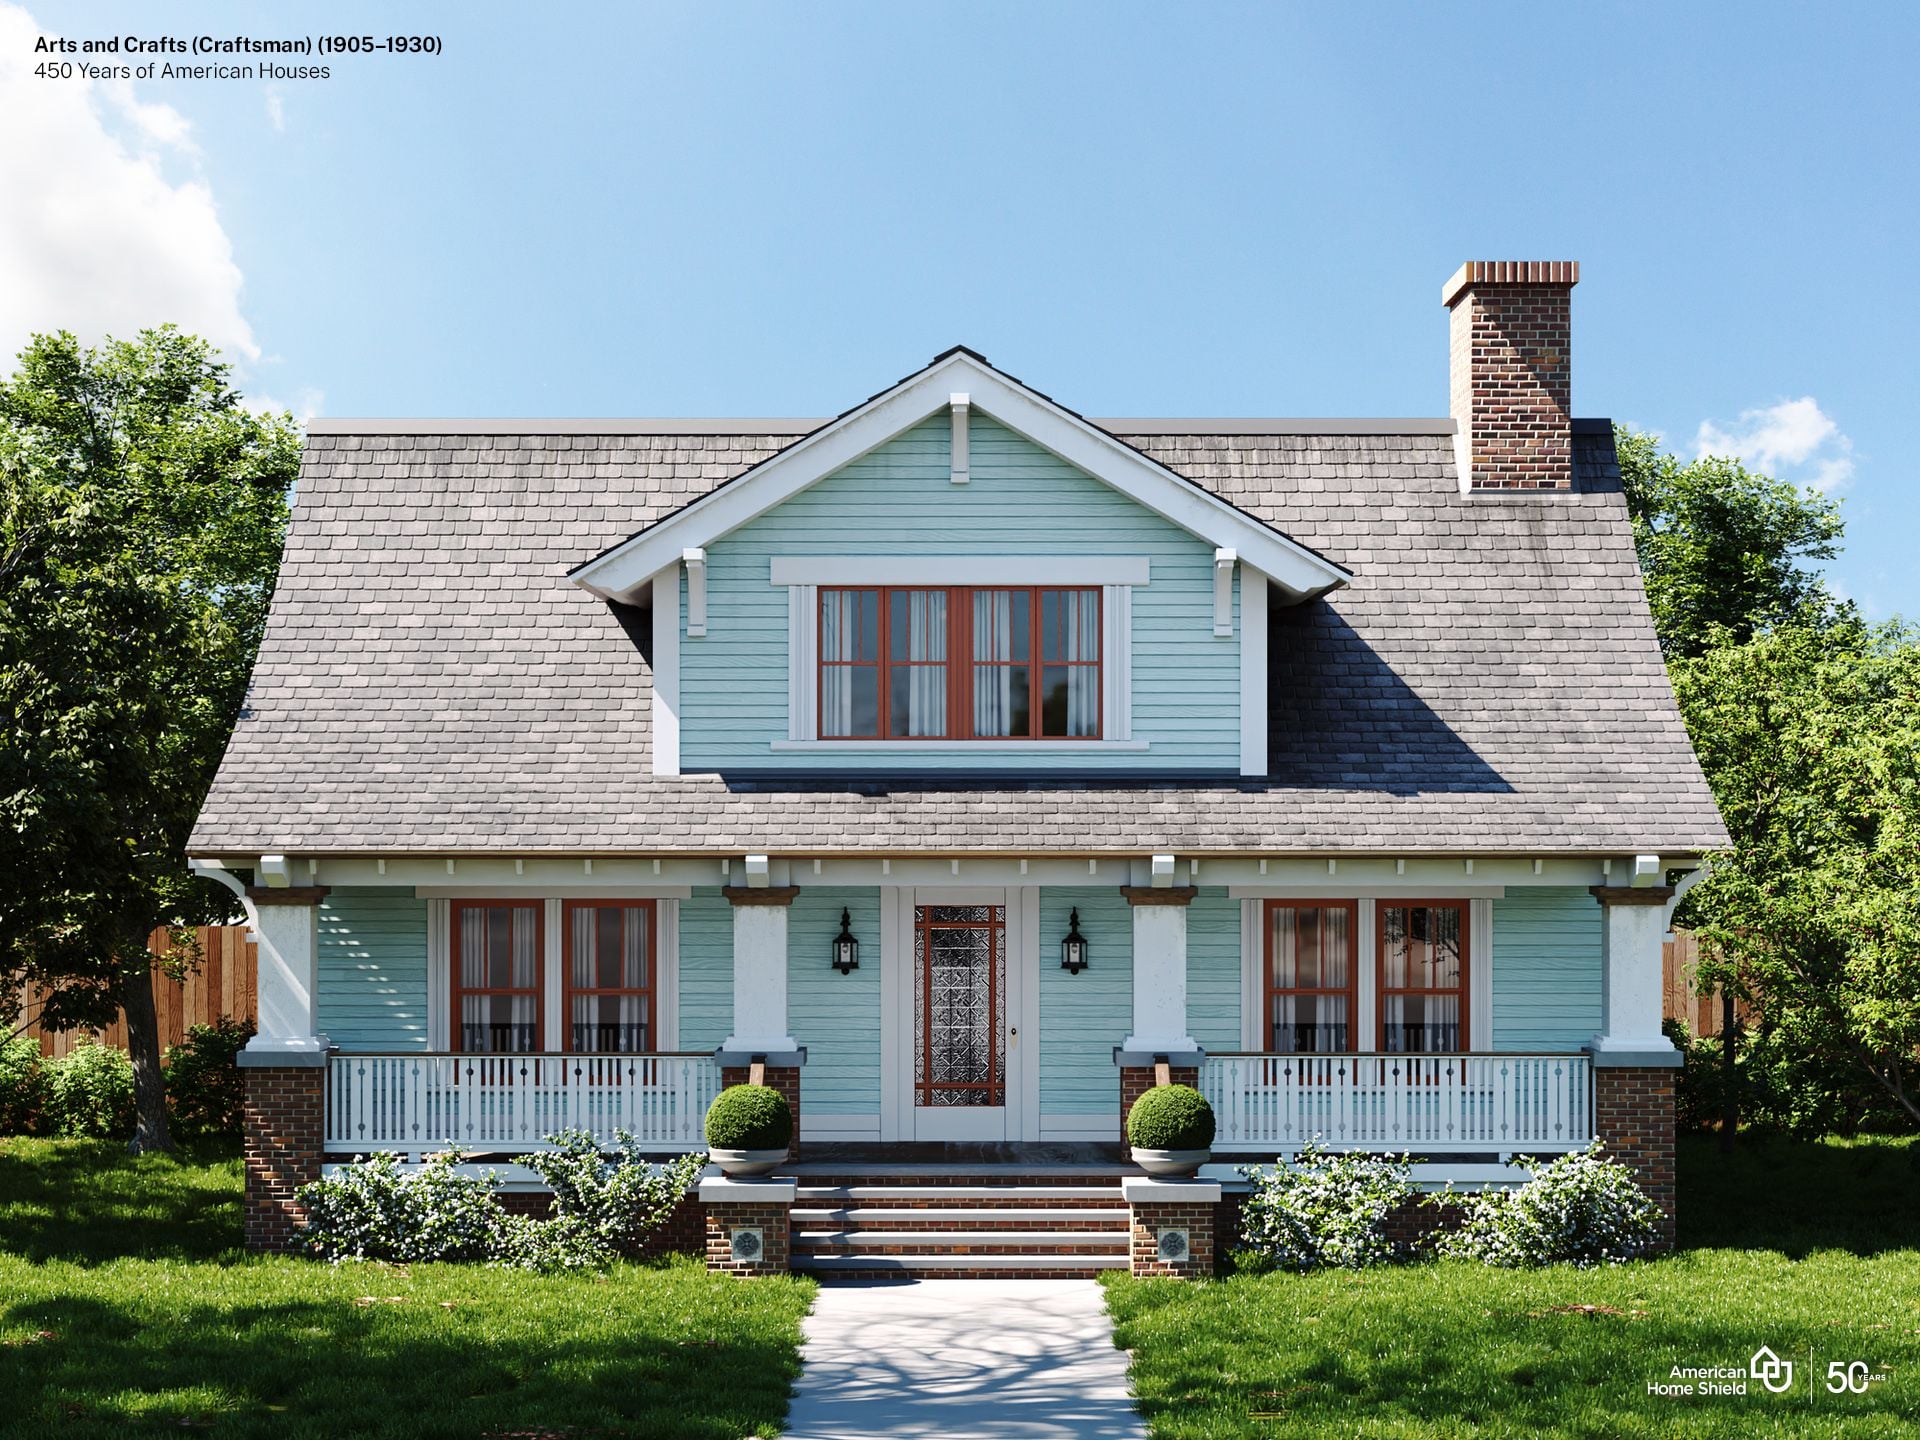 American Home Shield's re-creation of an American Craftsman (Art & Crafts) home, popular from 1905 to 1930. 